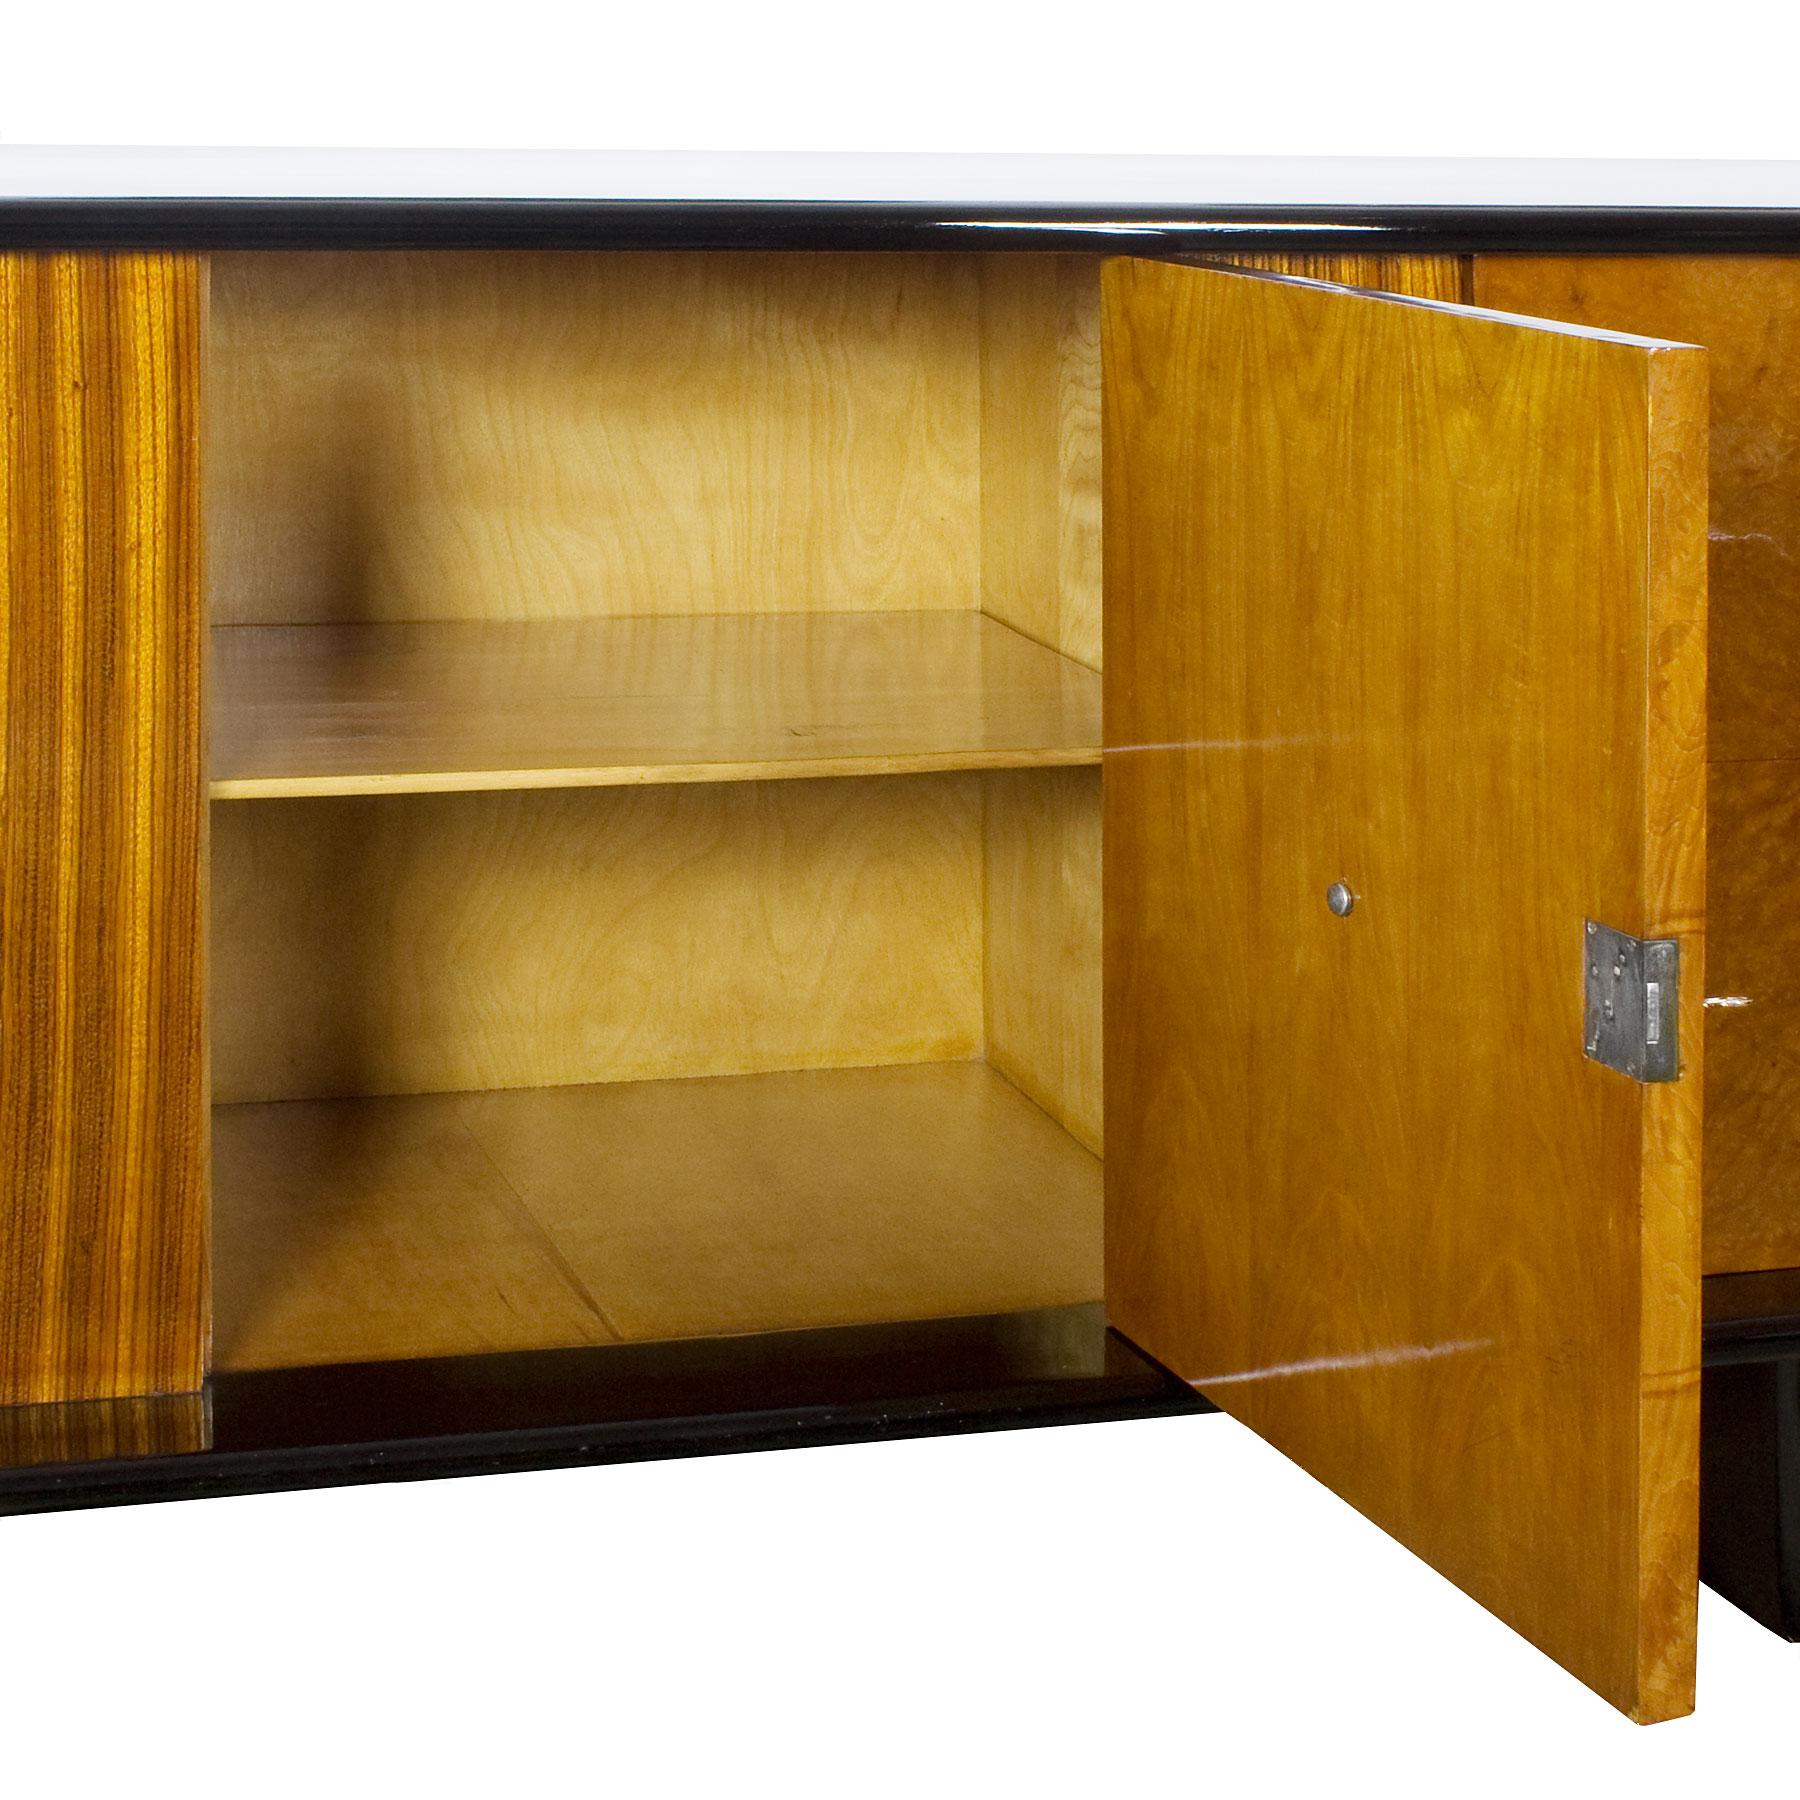 1930s Art Deco Sideboard, Maple, Zebrano, Cherrywood, Black Lacquer - Italy For Sale 3